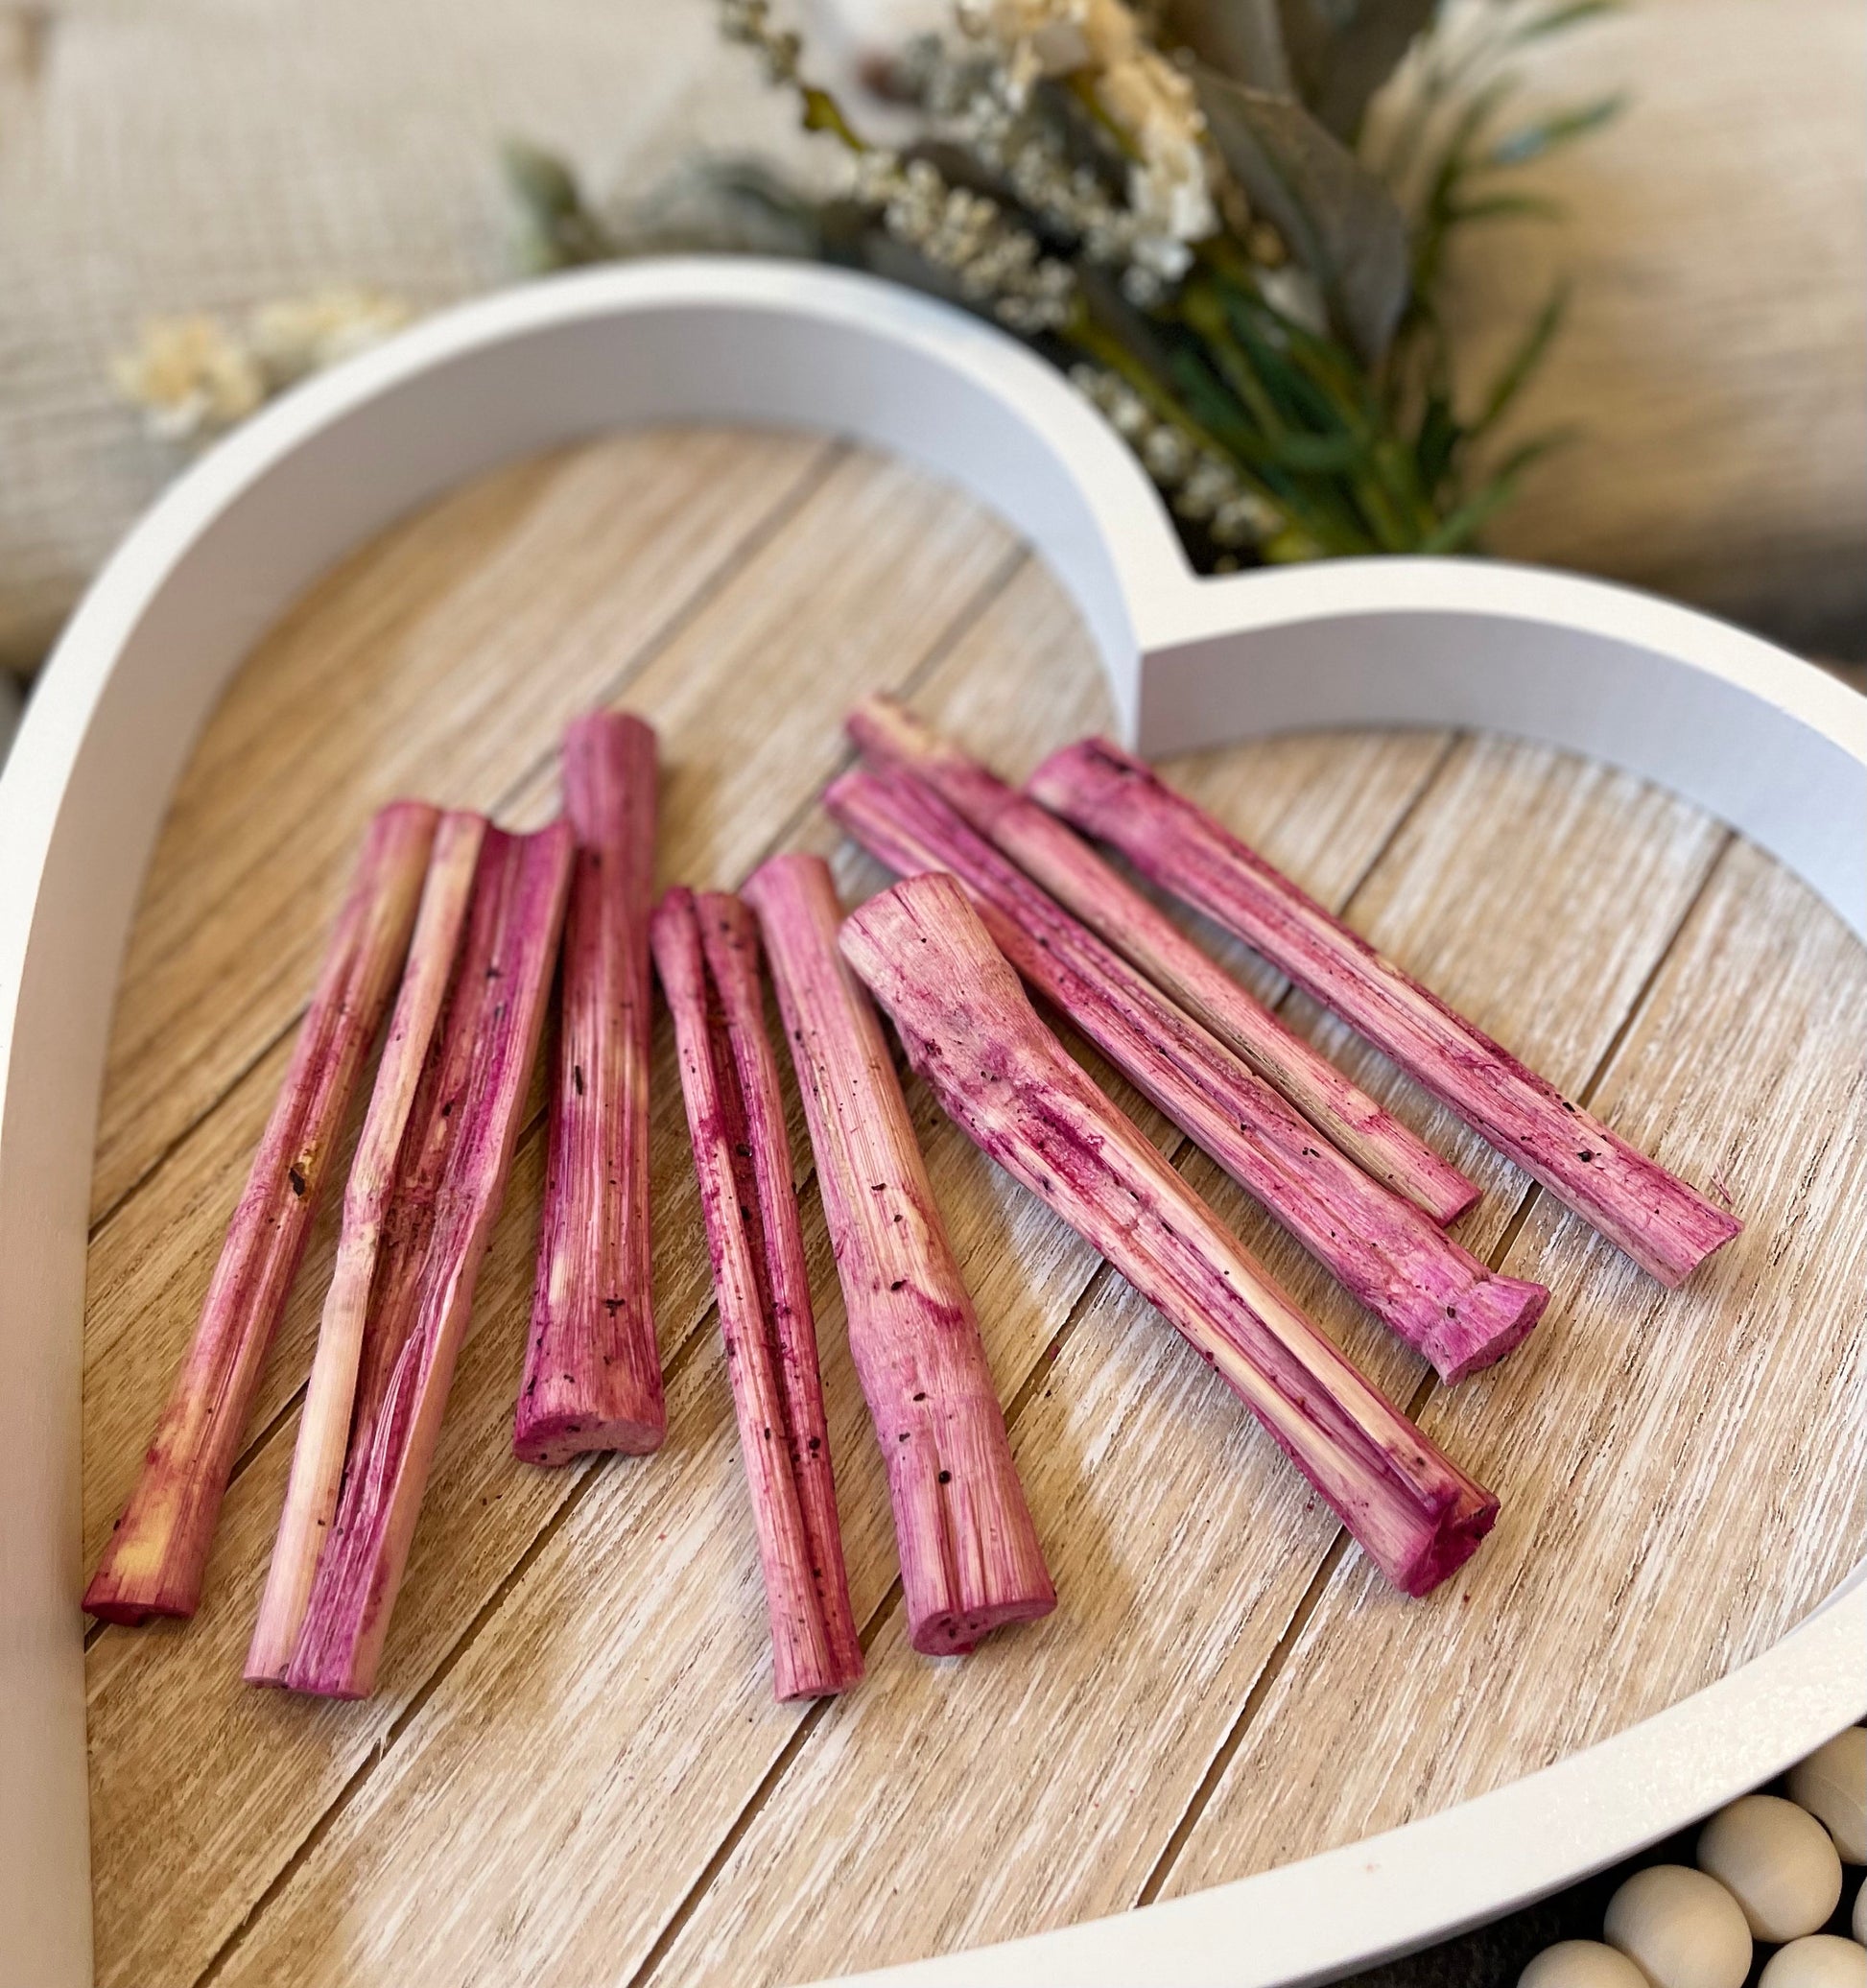 Sweet Bamboo Chews | 12 Flavors! | Fruit Infused Chew Toys